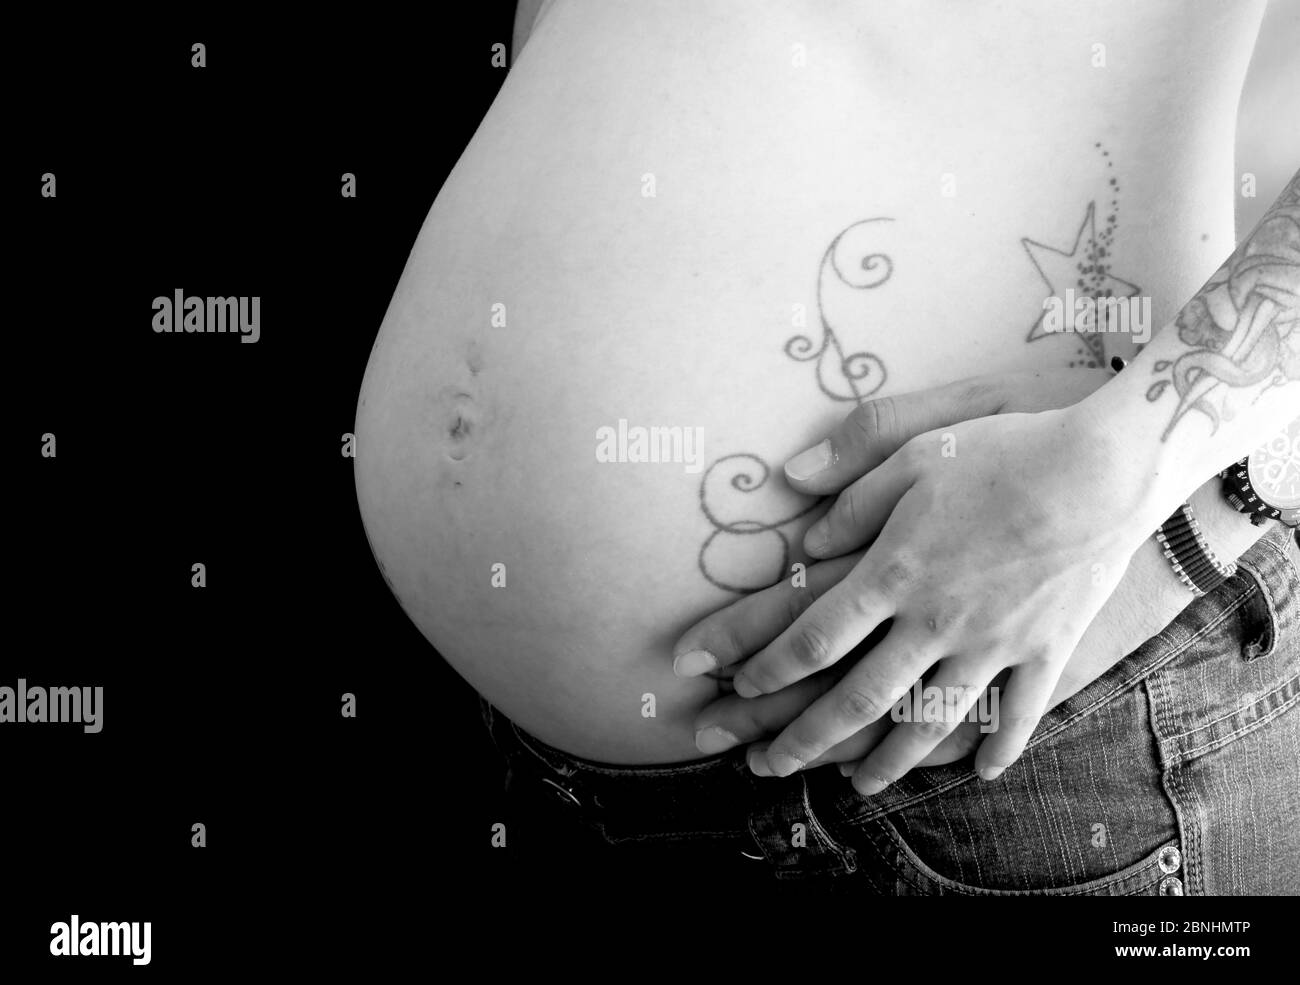 Can You Get a Tattoo while Pregnant? - Ink Different Tattoo School